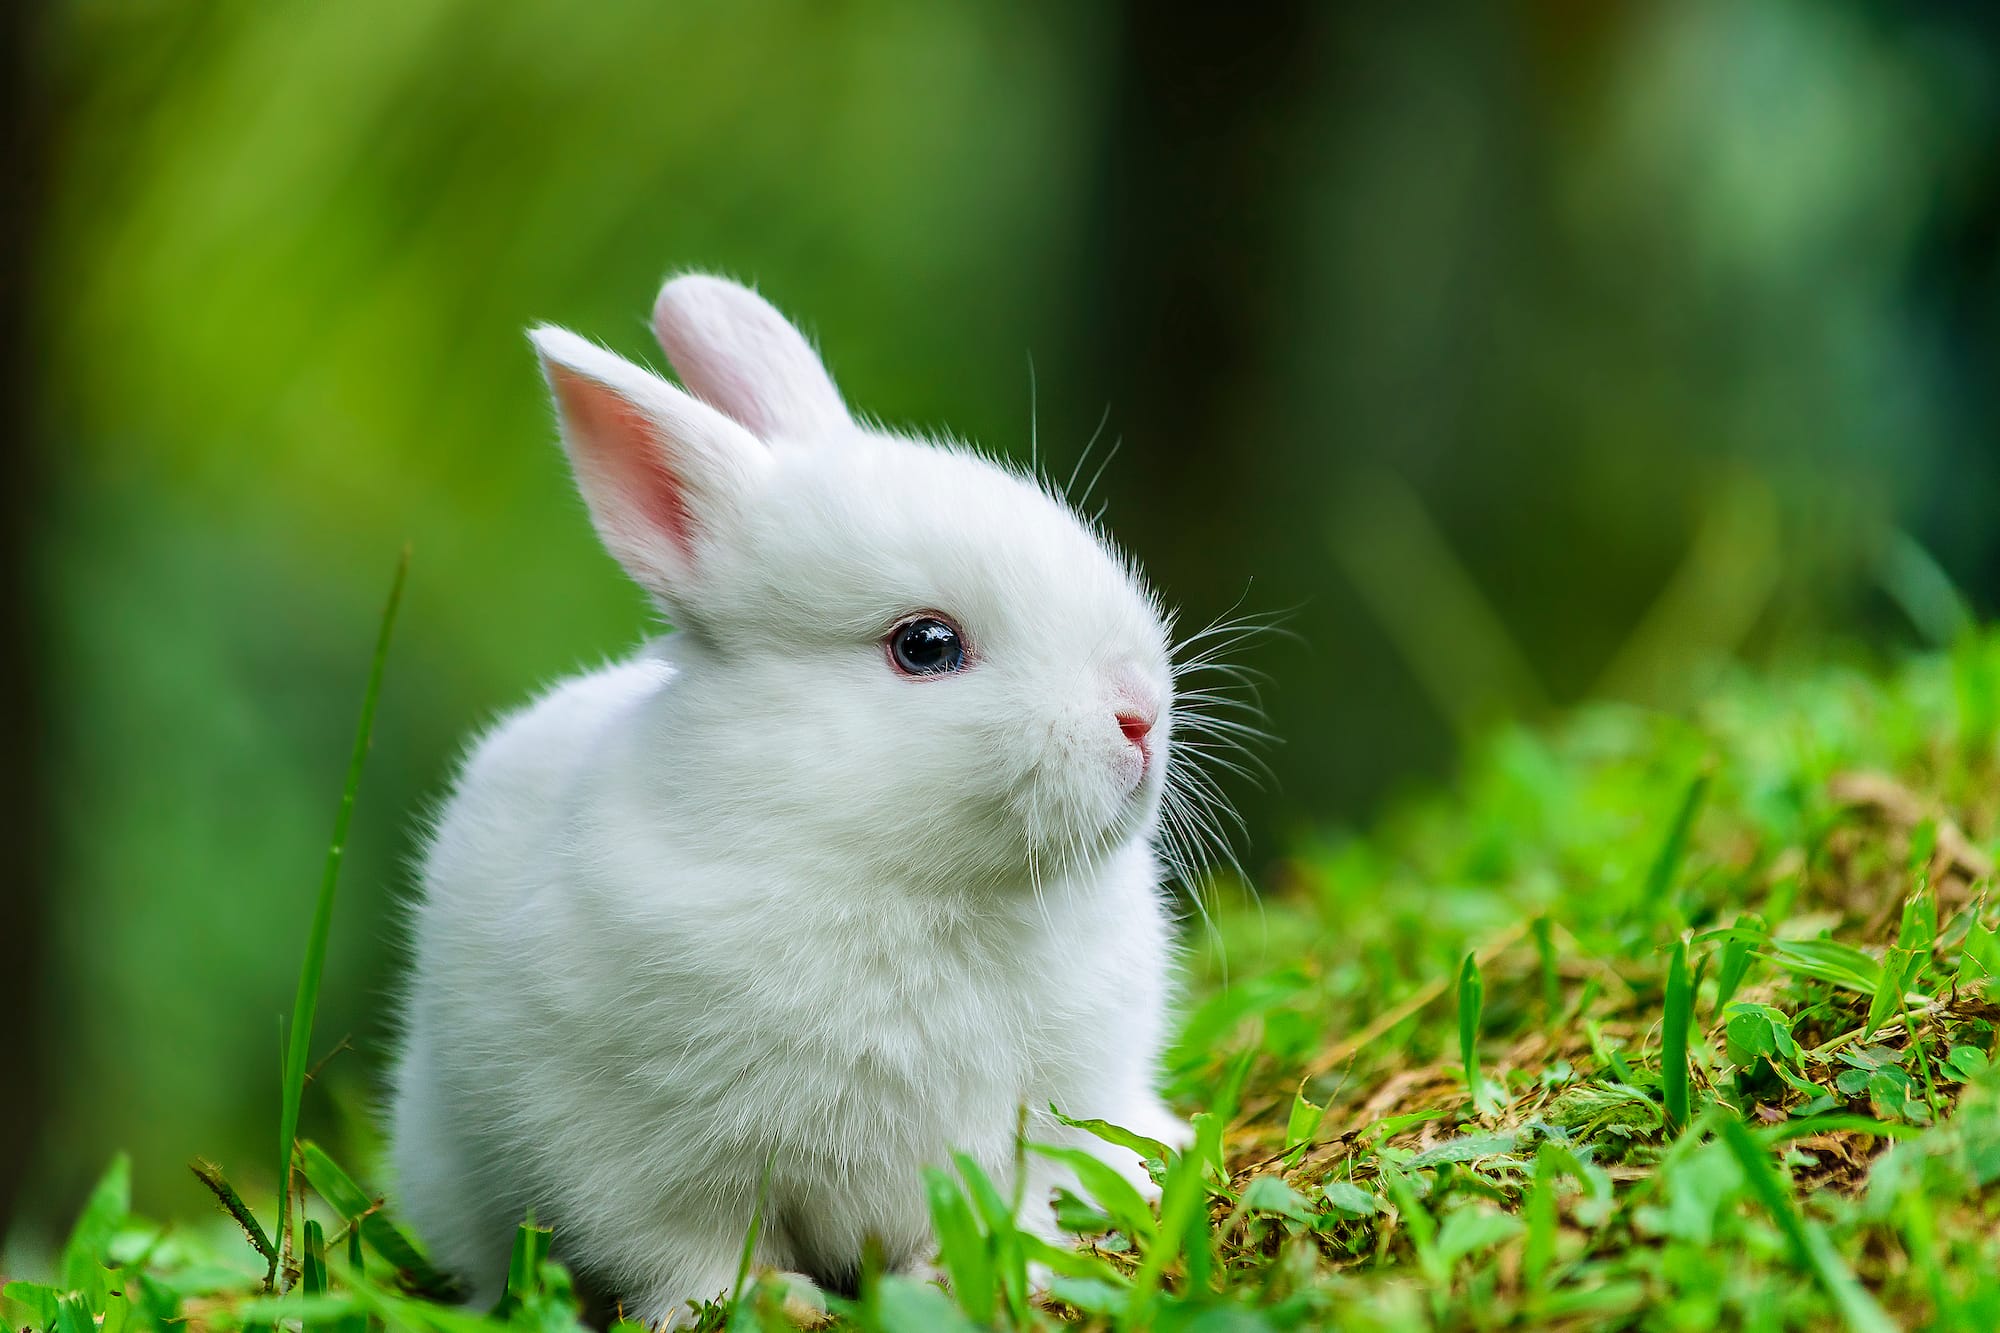 Image shows white rabbit in grass.